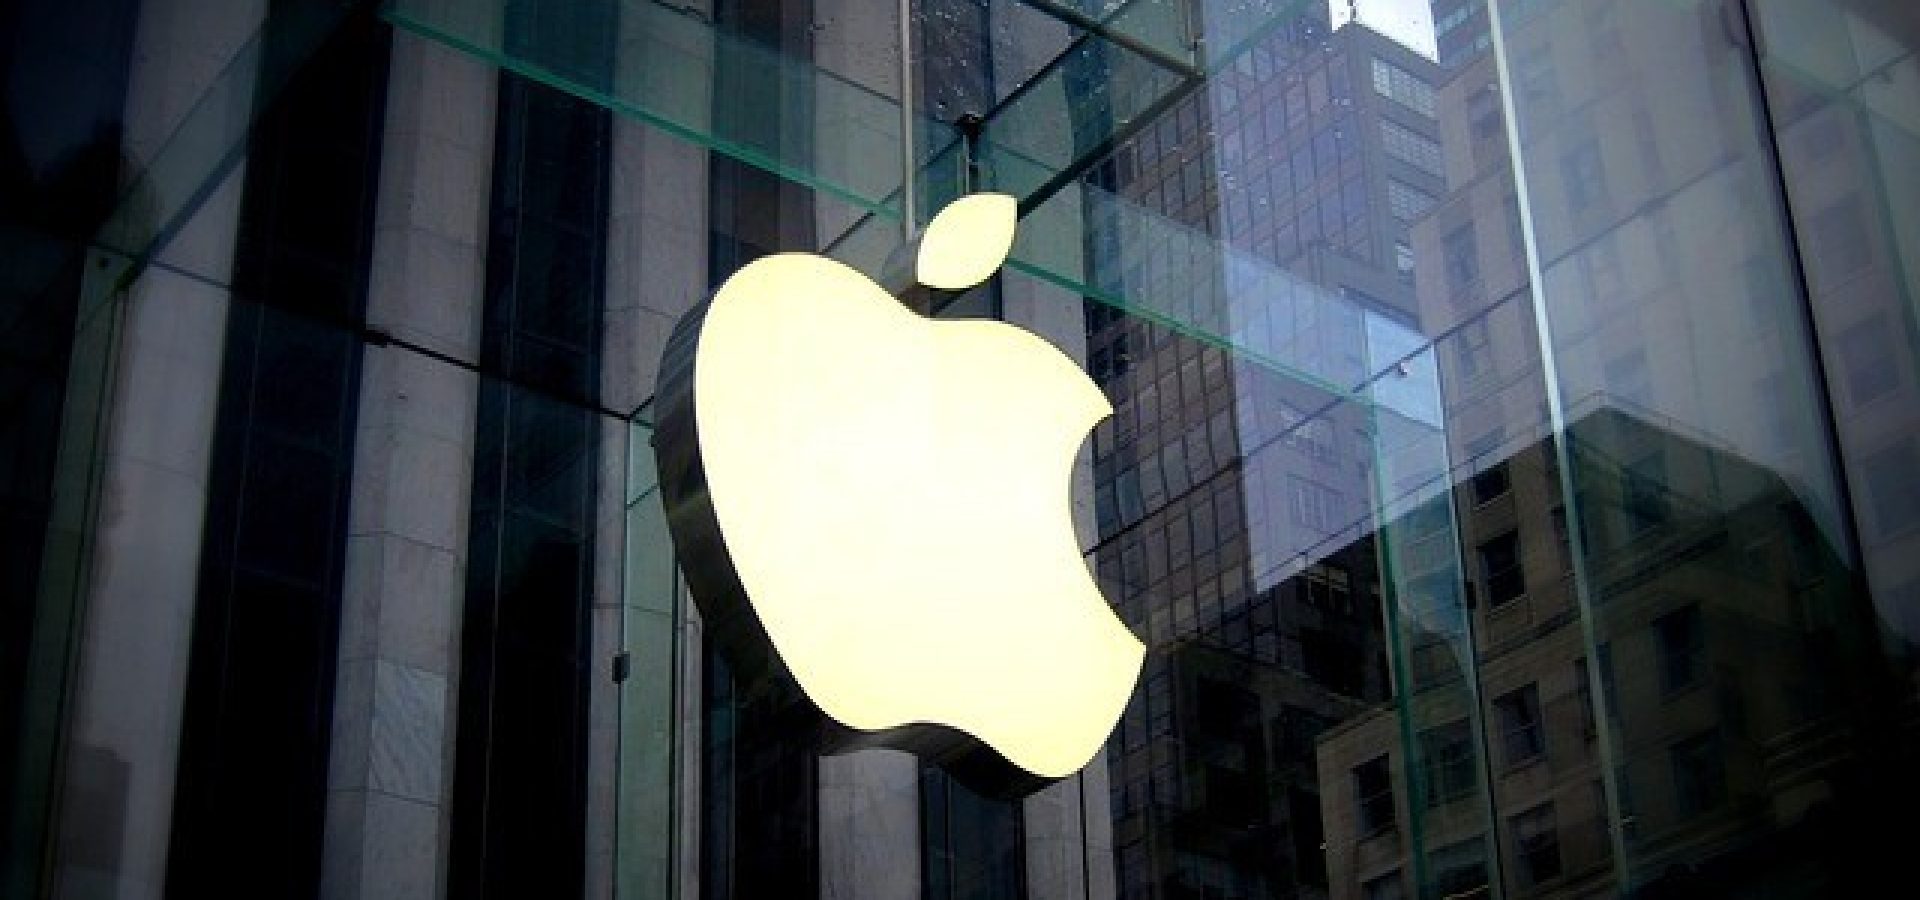 Apple banned its employees from using ChatGPT